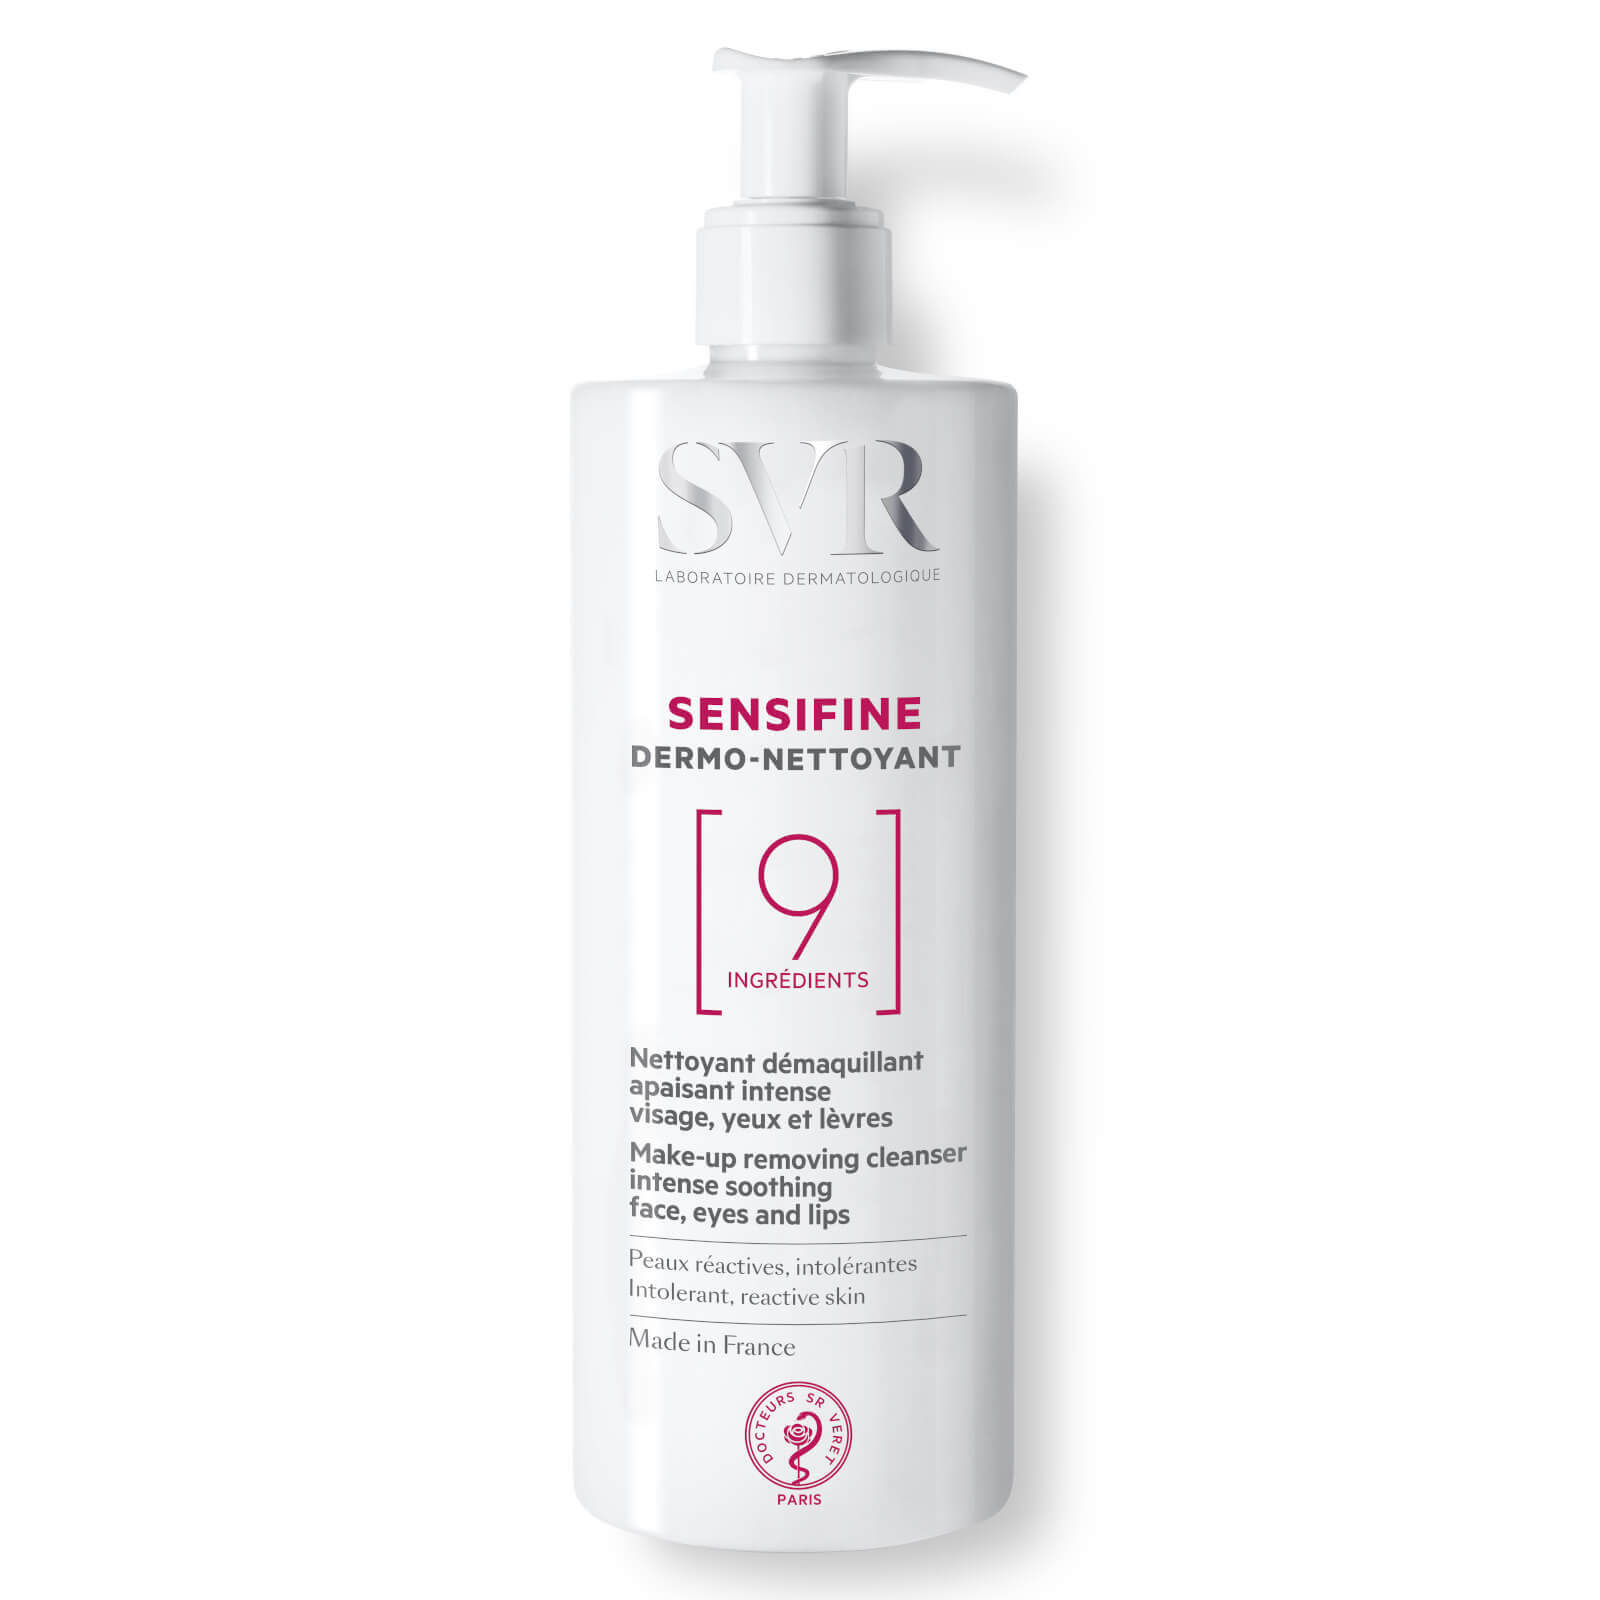 Photos - Facial / Body Cleansing Product SVR Sensifine Cream Cleanser - 400ml 1027426